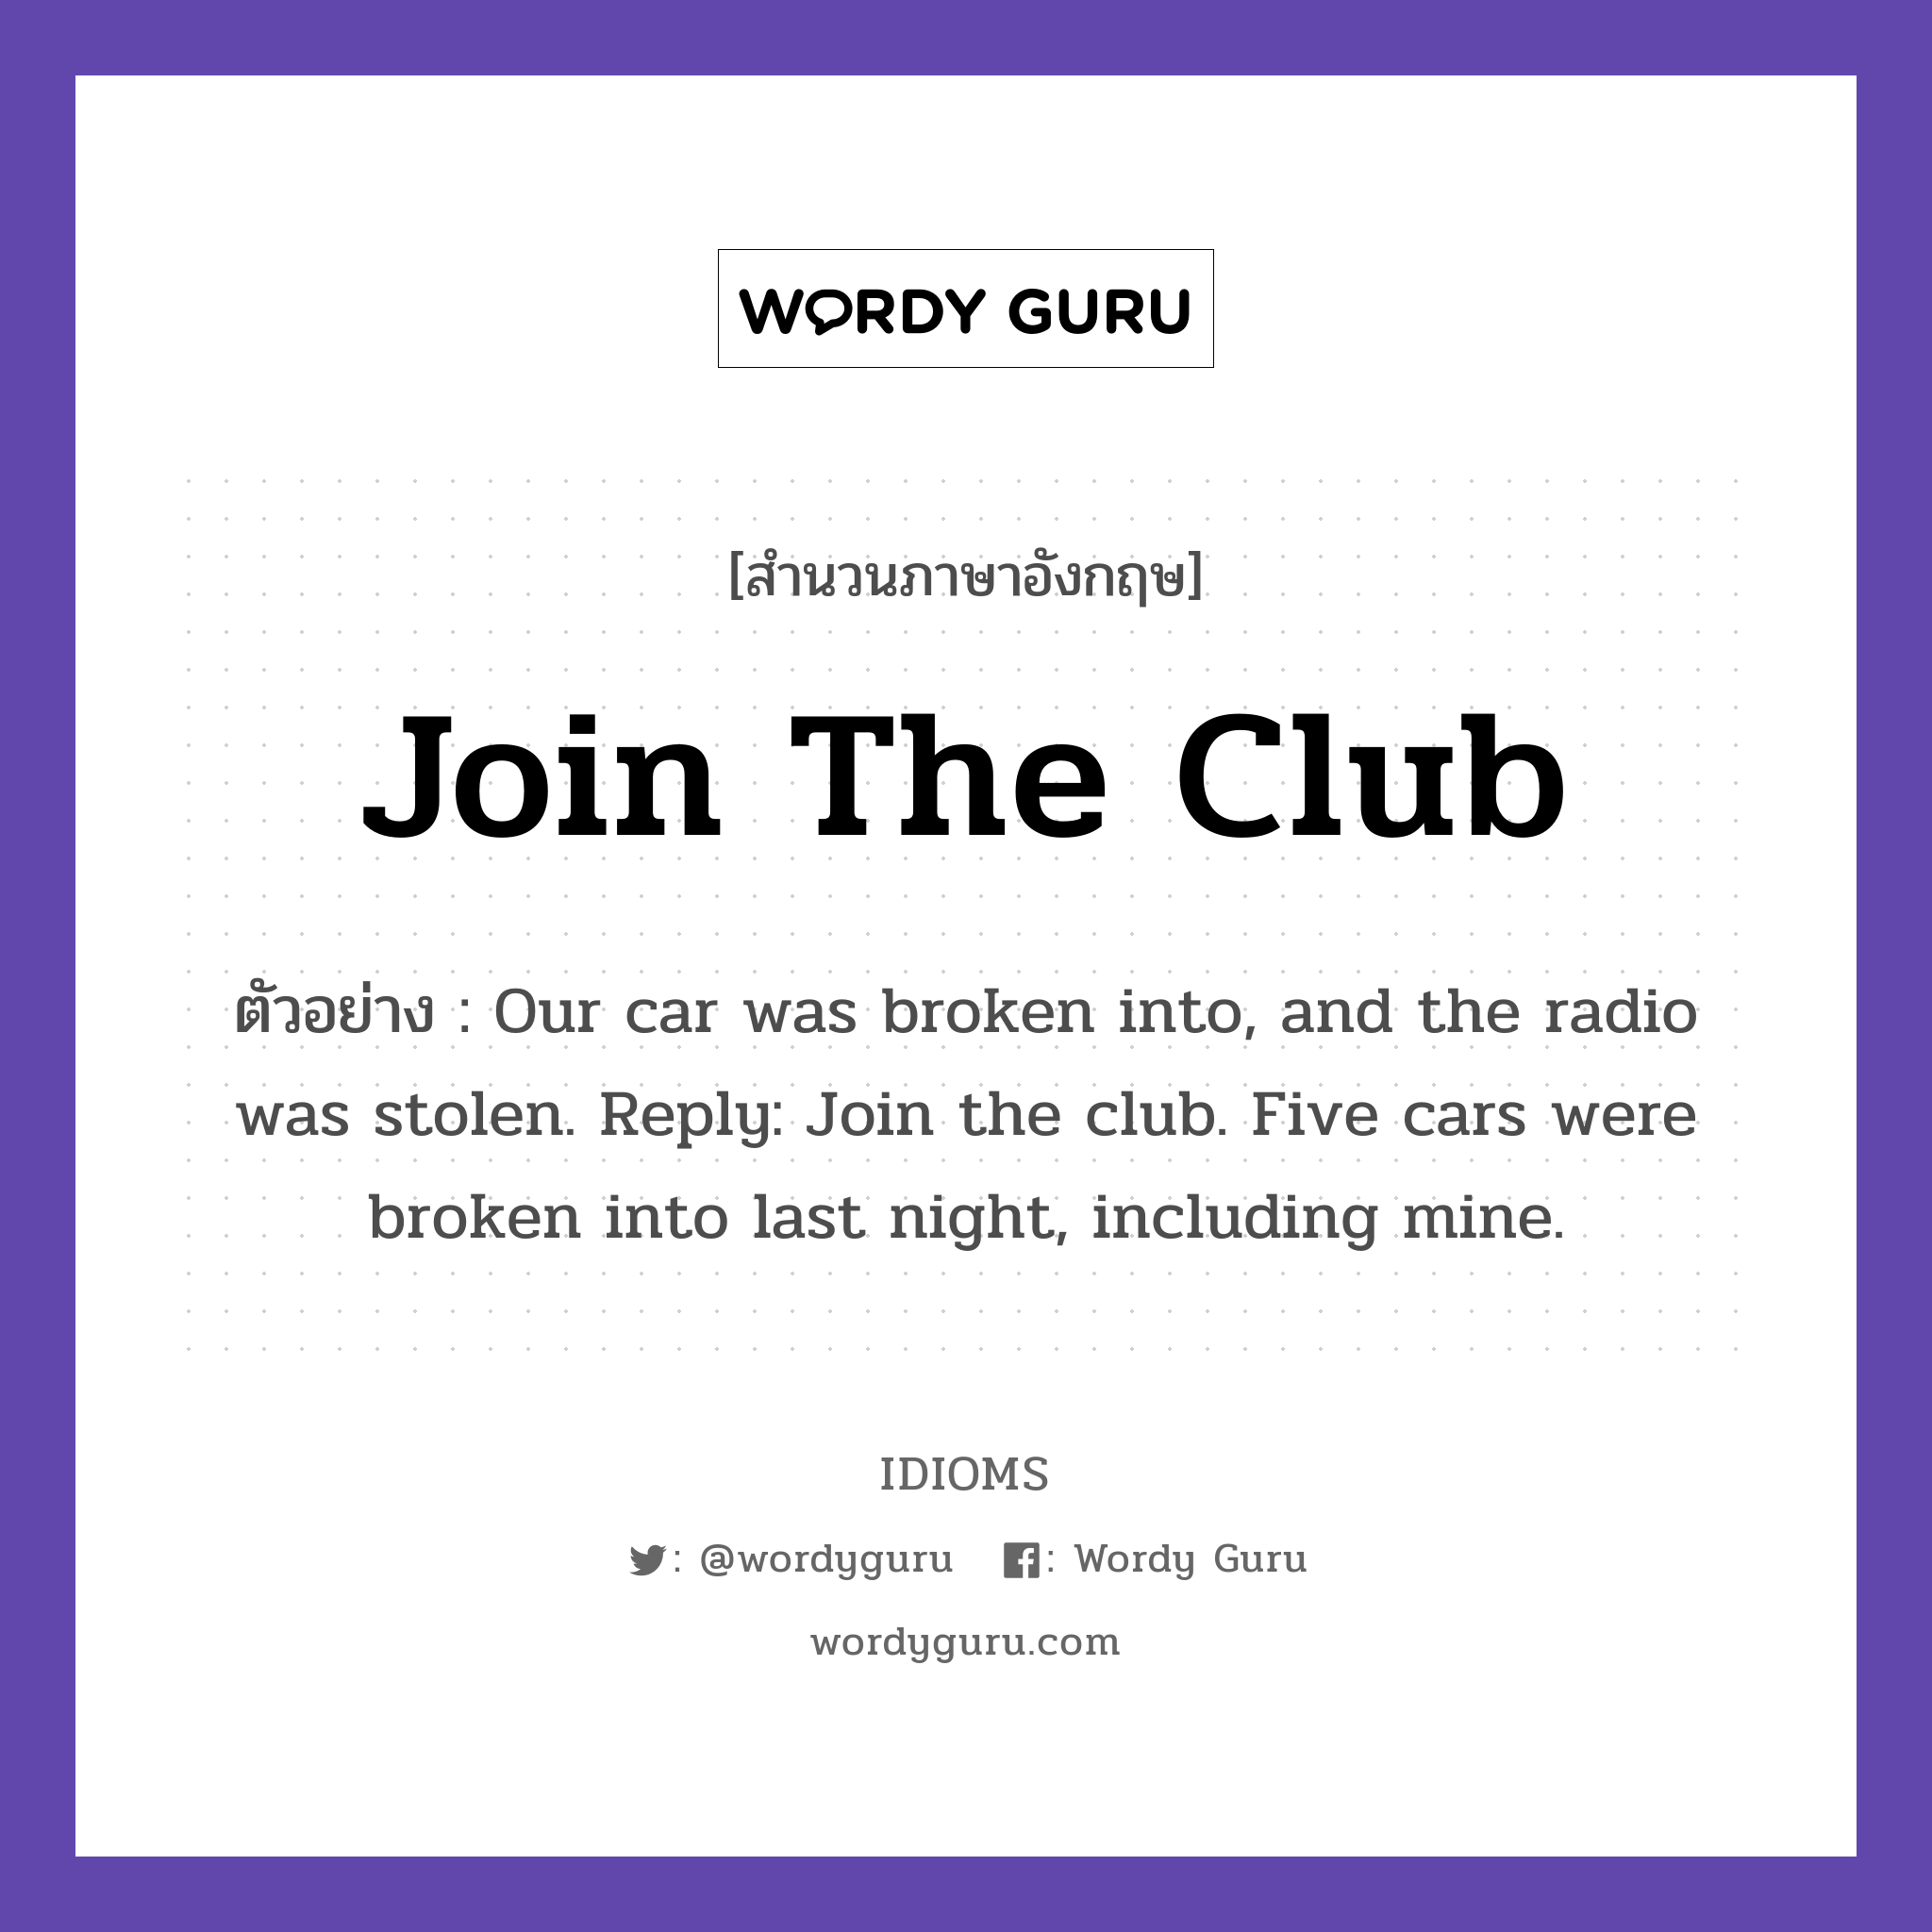 Join The Club แปลว่า?, สำนวนภาษาอังกฤษ Join The Club ตัวอย่าง Our car was broken into, and the radio was stolen. Reply: Join the club. Five cars were broken into last night, including mine.